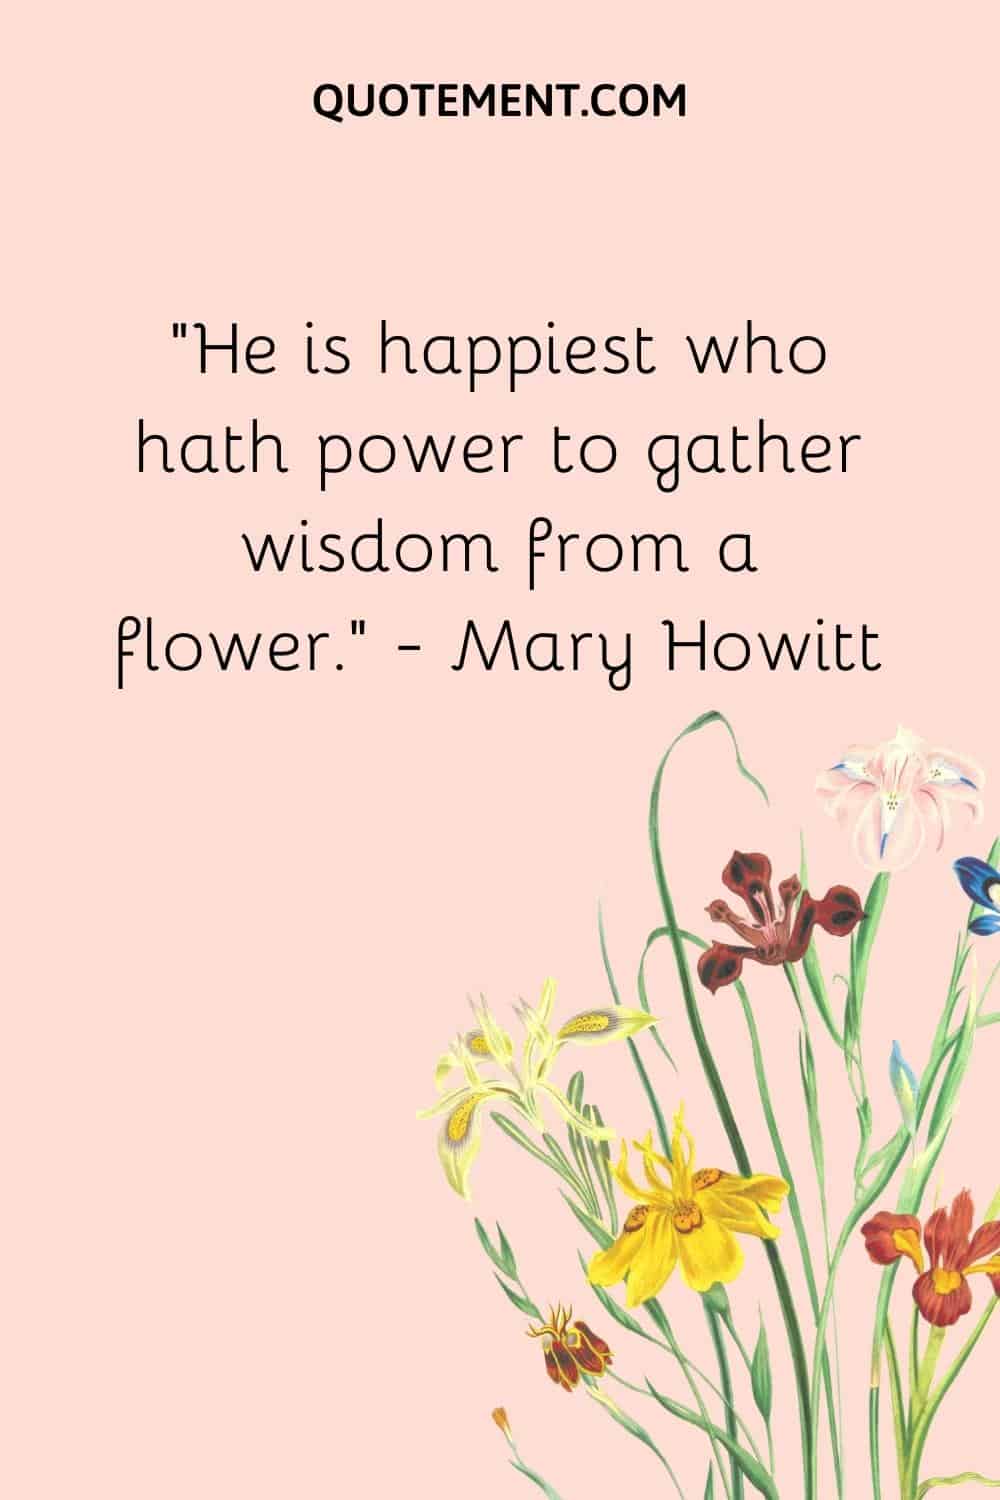 “He is happiest who hath power to gather wisdom from a flower.” — Mary Howitt